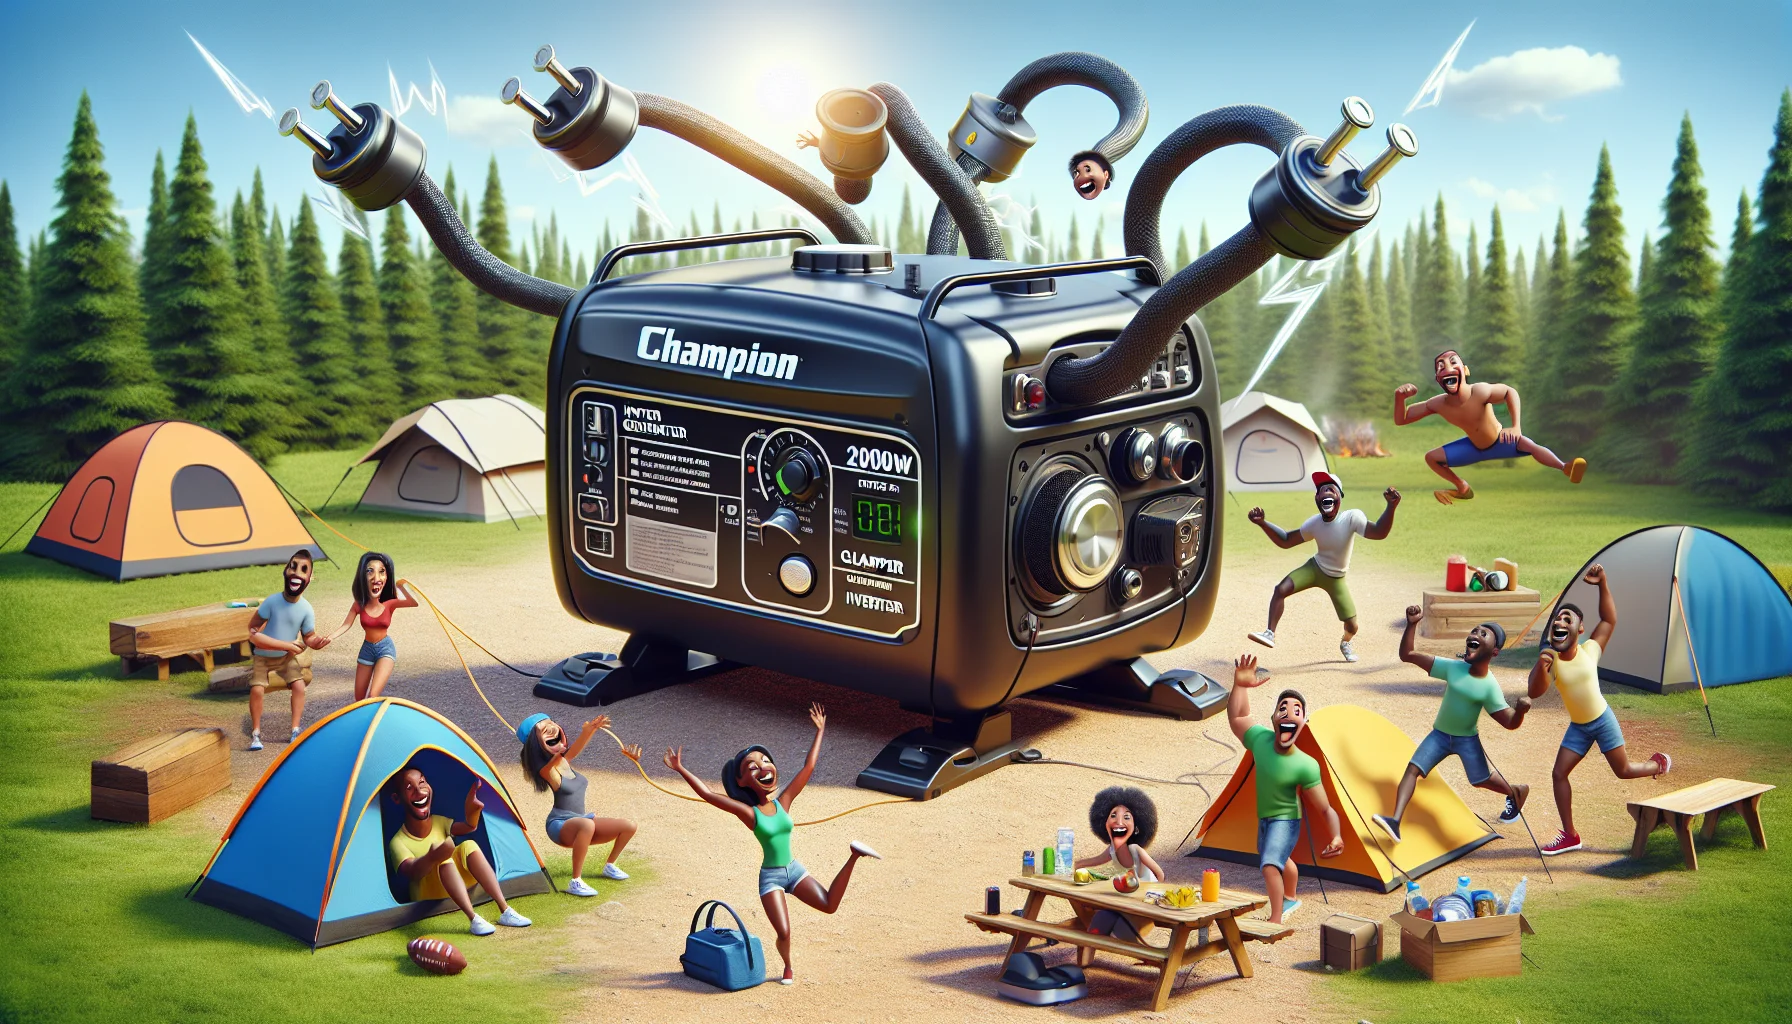 Create a visually amusing scenario featuring a Champion 2000W Inverter Generator. It is the center of attraction, humorously designed with exaggerated proportions indicating its power, like extremely large exhaust vents and oversized power dials. The generator is placed outdoors in a bright, sunny campsite. Around the generator, animated power lines are humorously chasing after camping equipment to provide them power. Nearby, a group of eager people - Black woman, Hispanic man, Middle Eastern woman and a South Asian man - is laughing and cheering on the lively scene. All of them are eagerly waiting to use the generator.